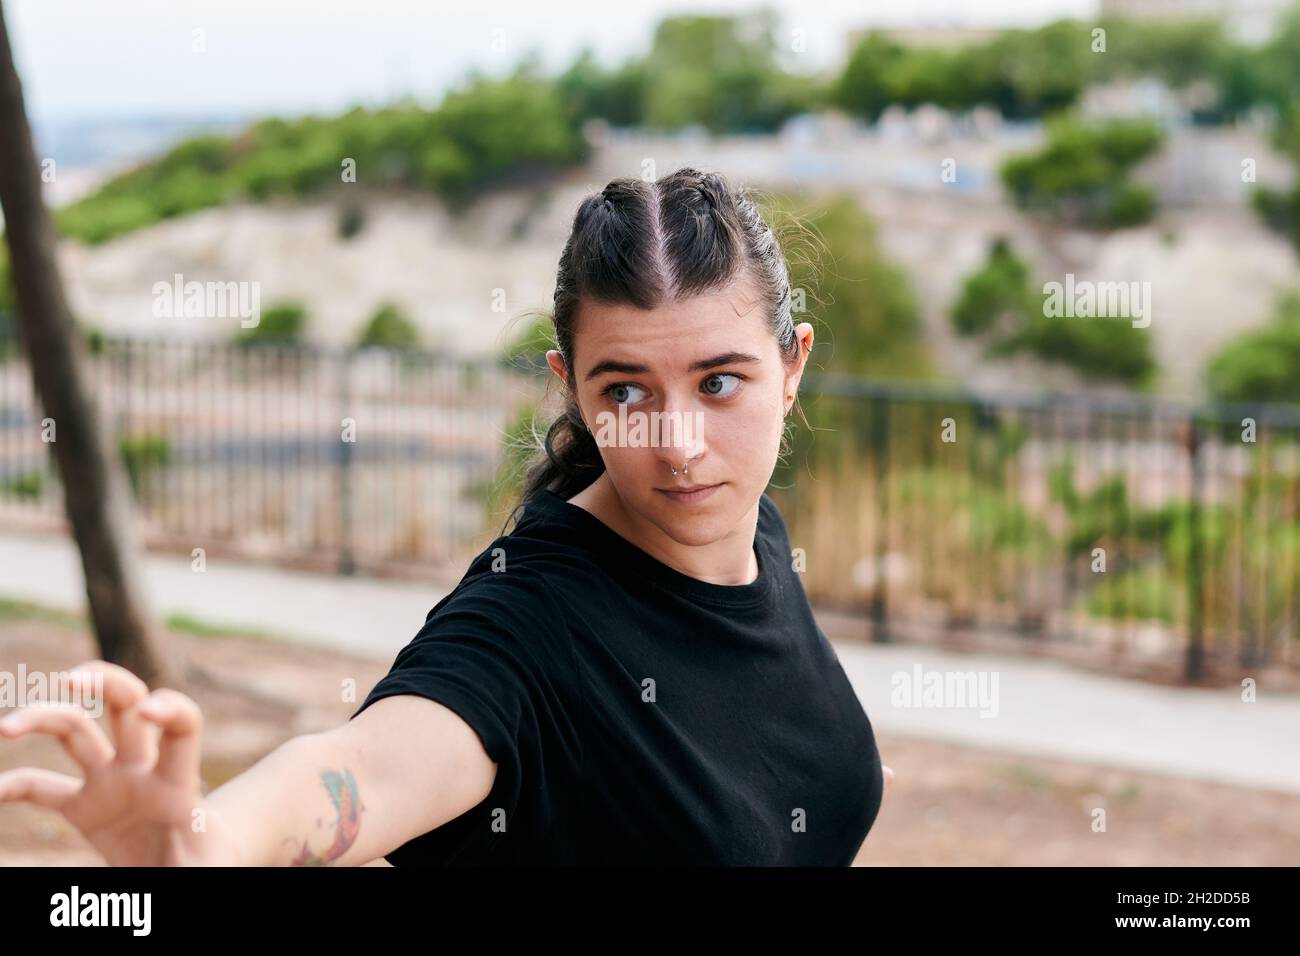 Portrait of a woman training martial arts in a park Stock Photo